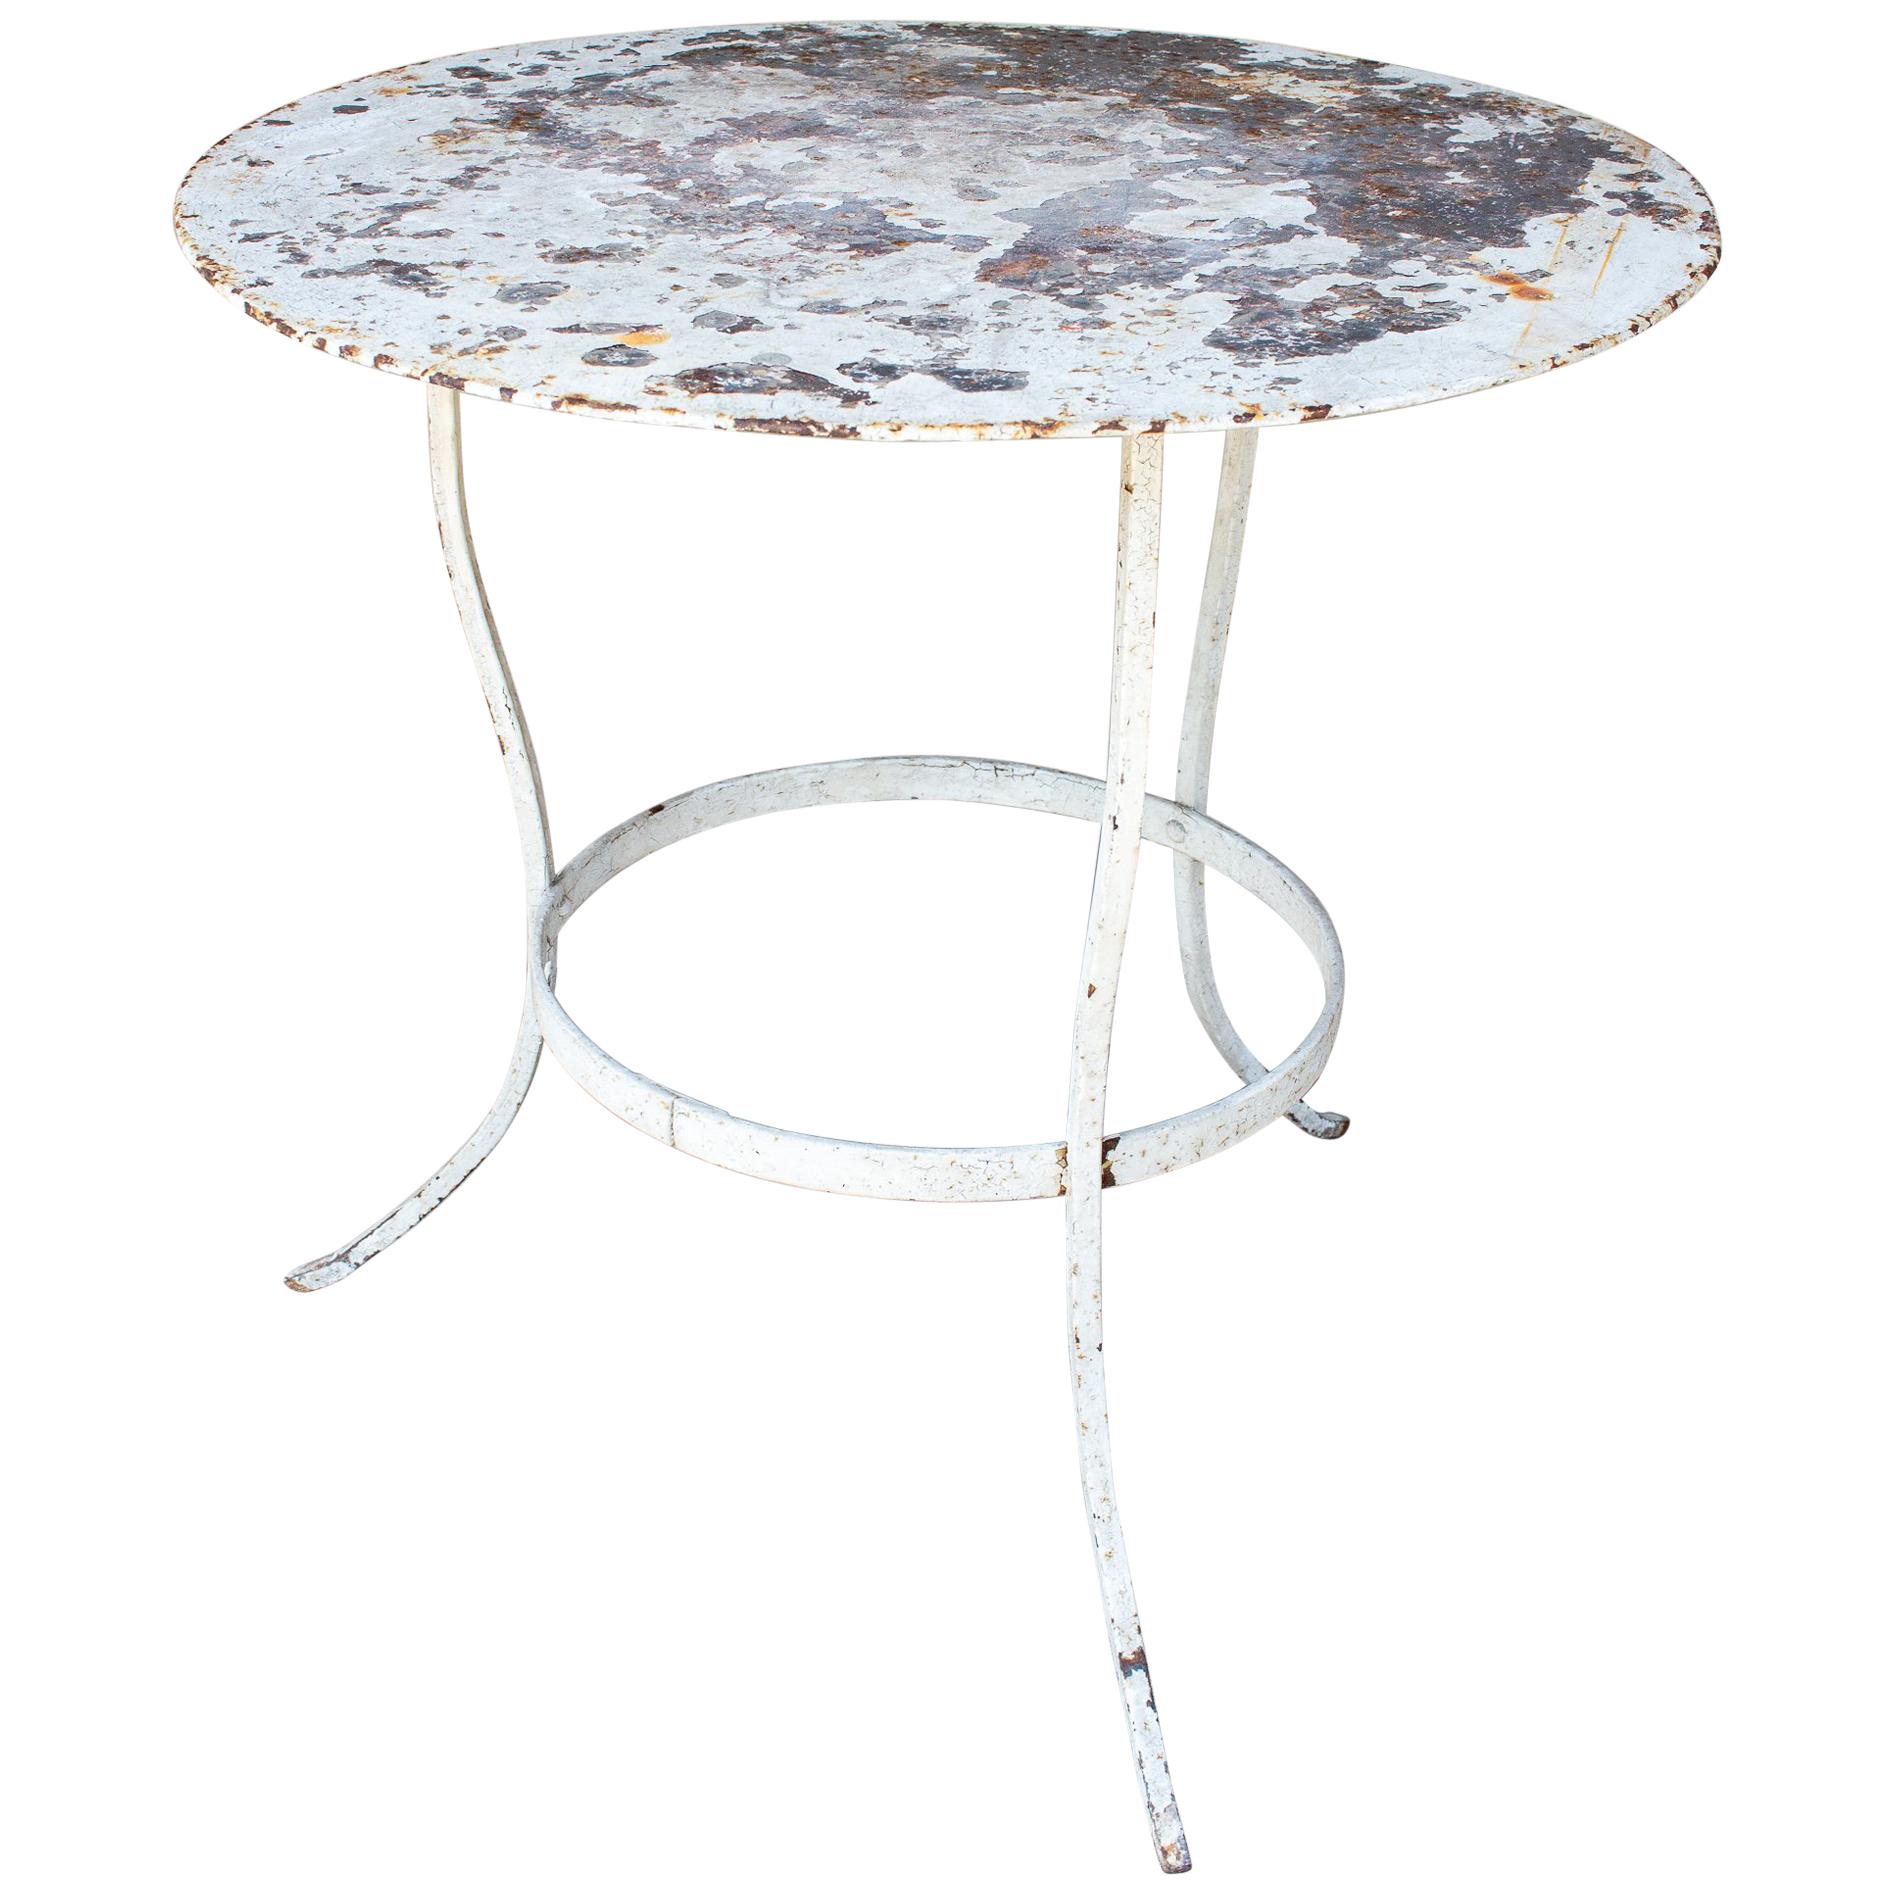 1930s French Distressed Painted Iron Garden Table